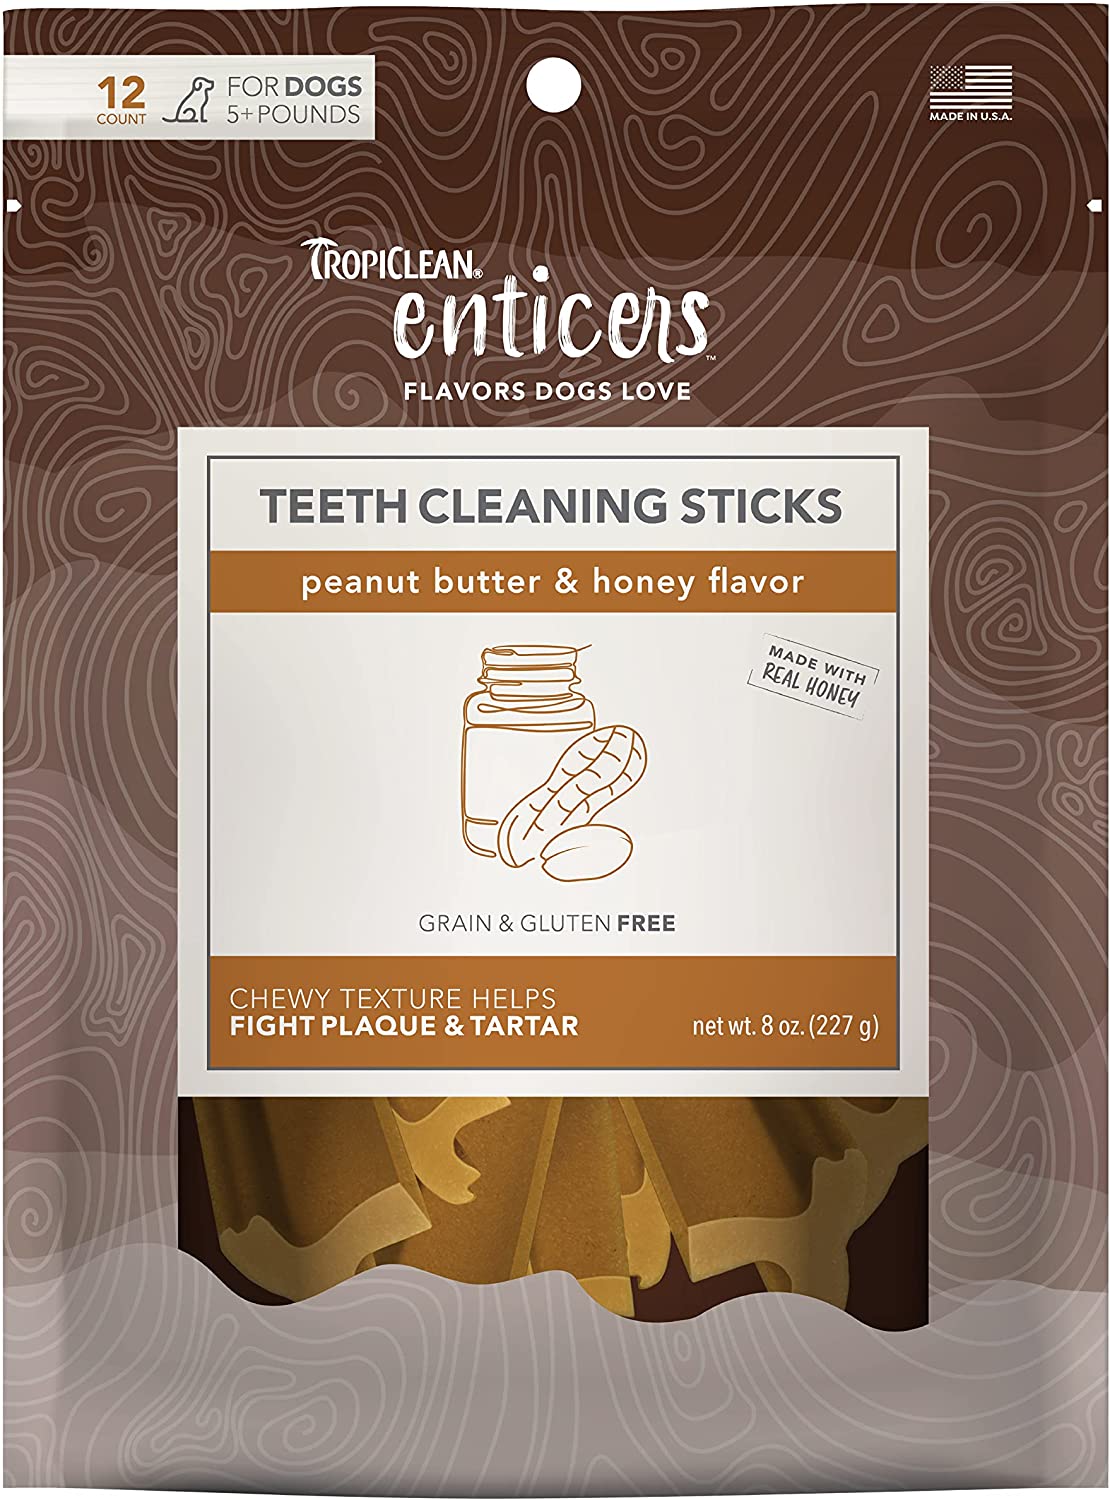 TropiClean Enticers Teeth Cleaning Sticks for Dogs Dental Treat - Cleans Teeth as They Chew